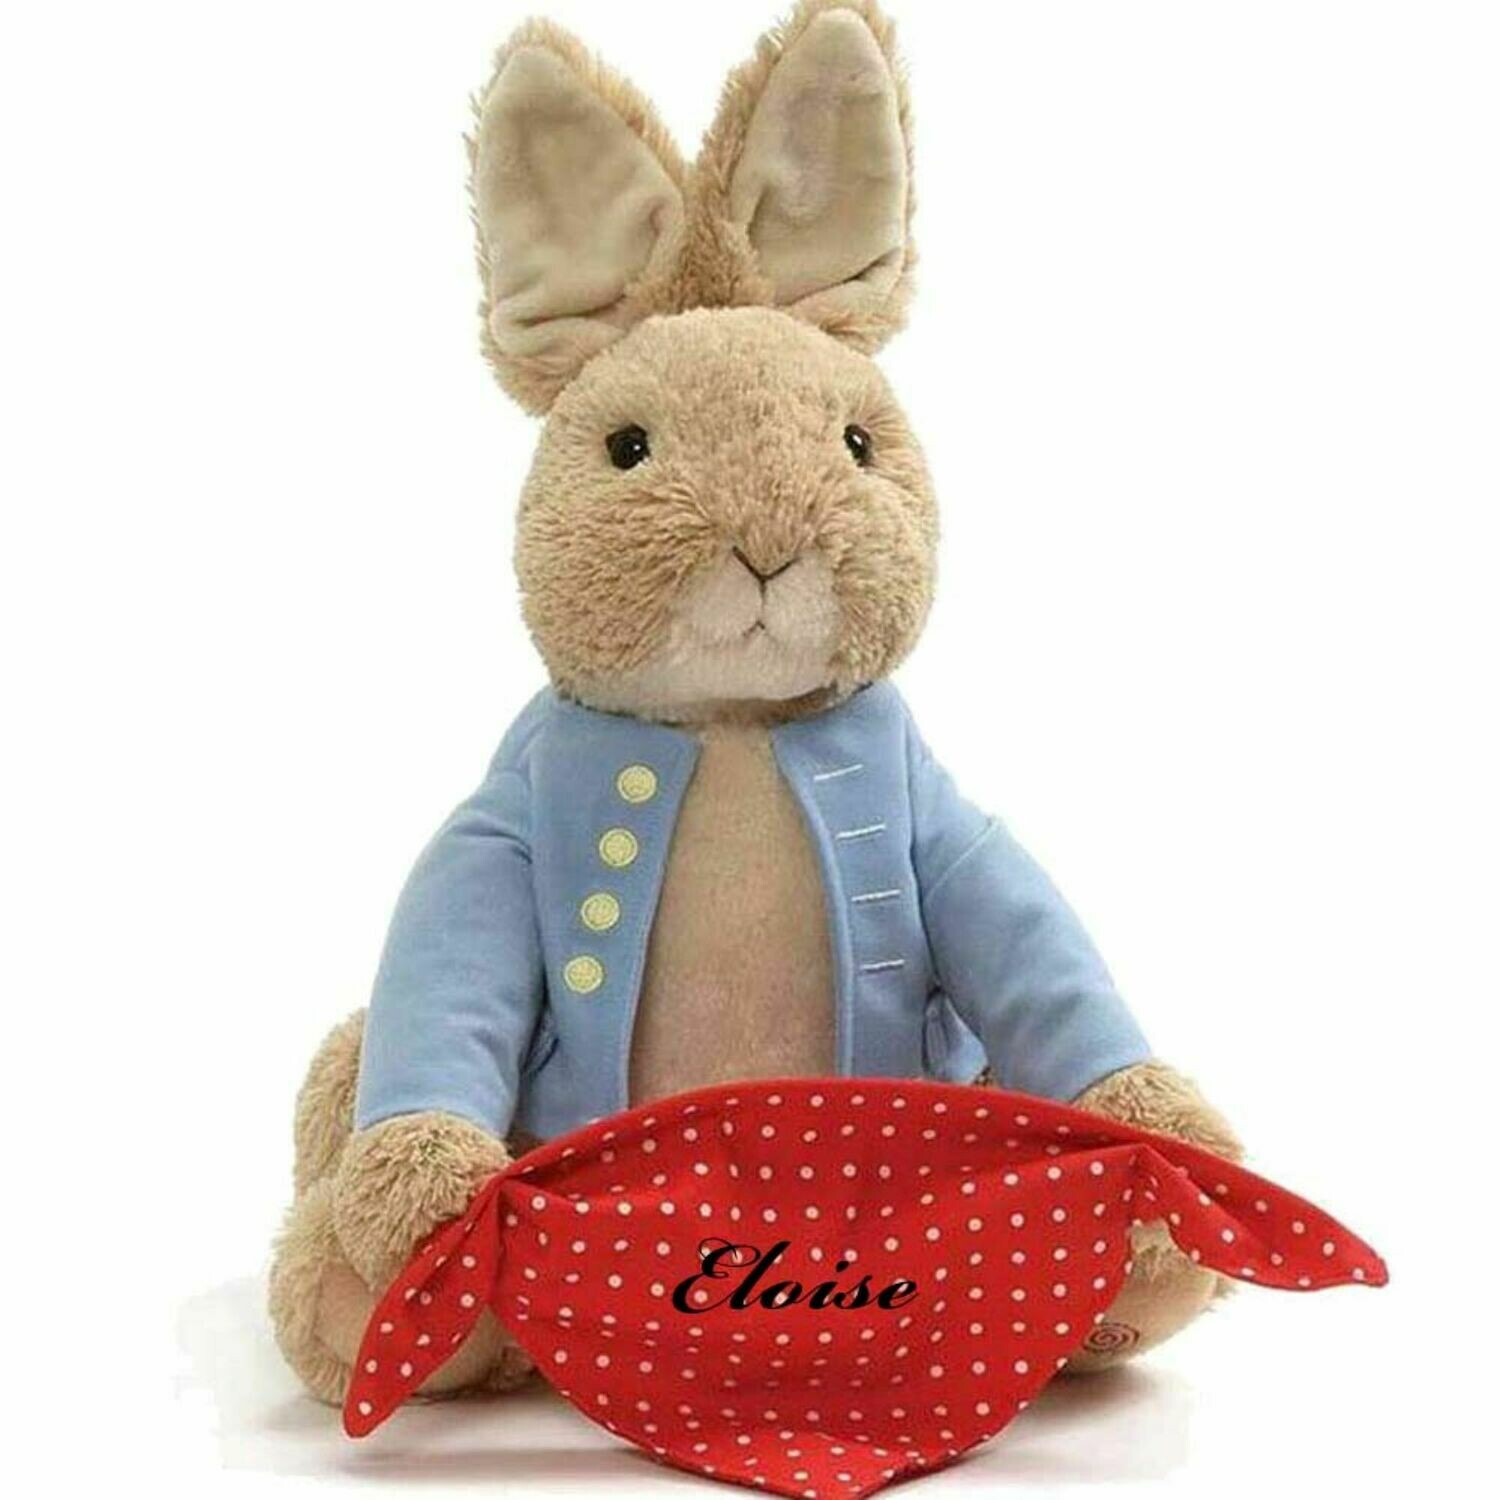 Peter Rabbit Animated Peek A Boo Personalized Customized with Child's Name